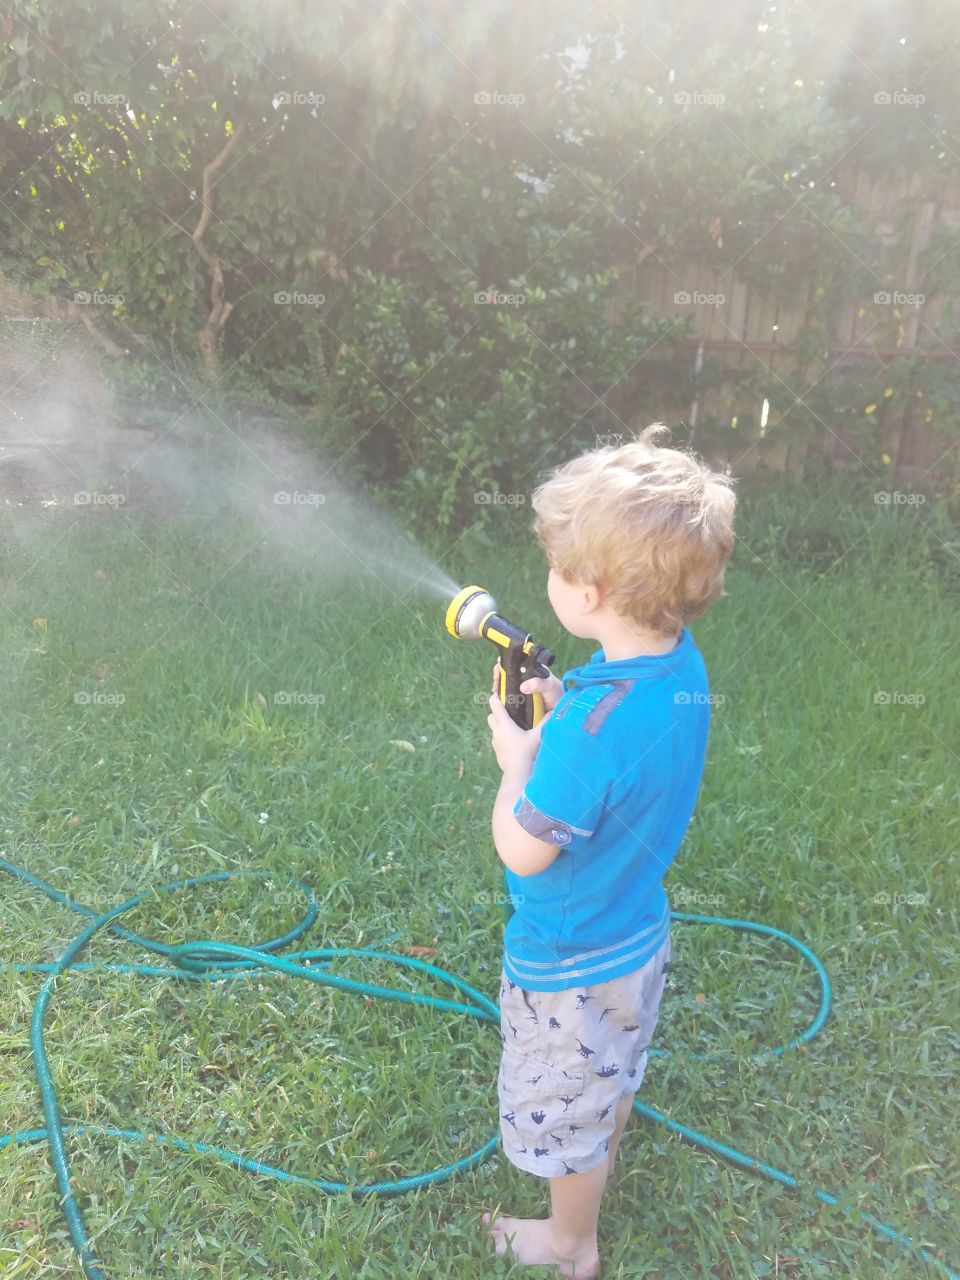 watering the grass